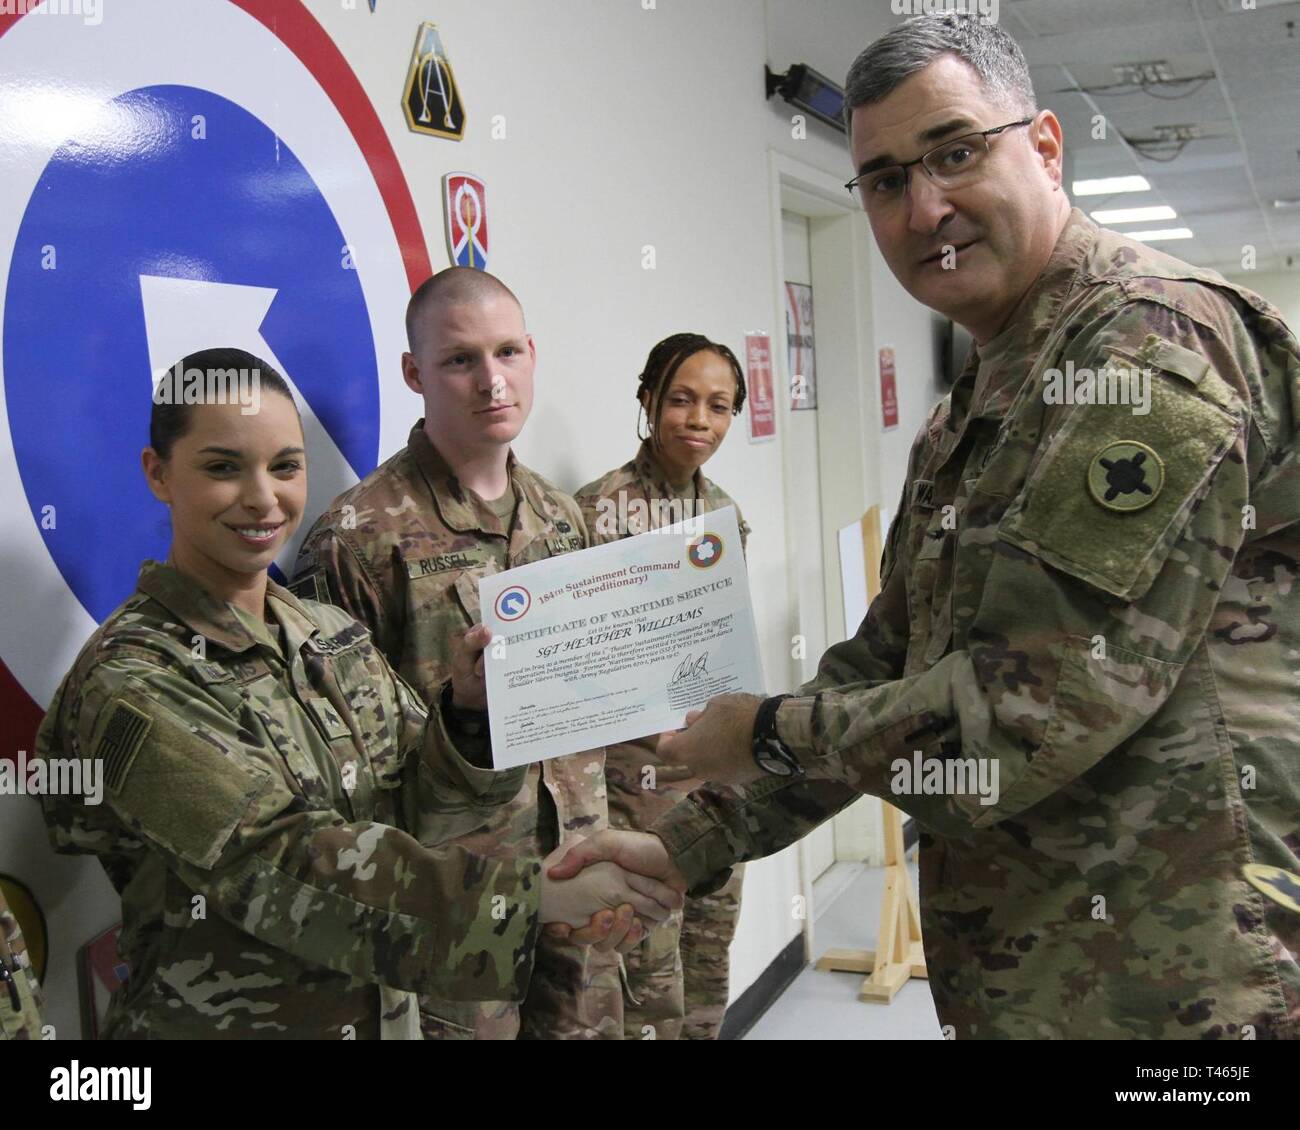 Brig. Gen. Clint E. Walker, commanding general of the 184th Sustainment Command, presents a certificate of wartime service to Sgt. Heather Williams following the placement of the 184th ESC patch on his right shoulder at Camp Arifjan, Kuwait, Mar. 3, 2019. Stock Photo